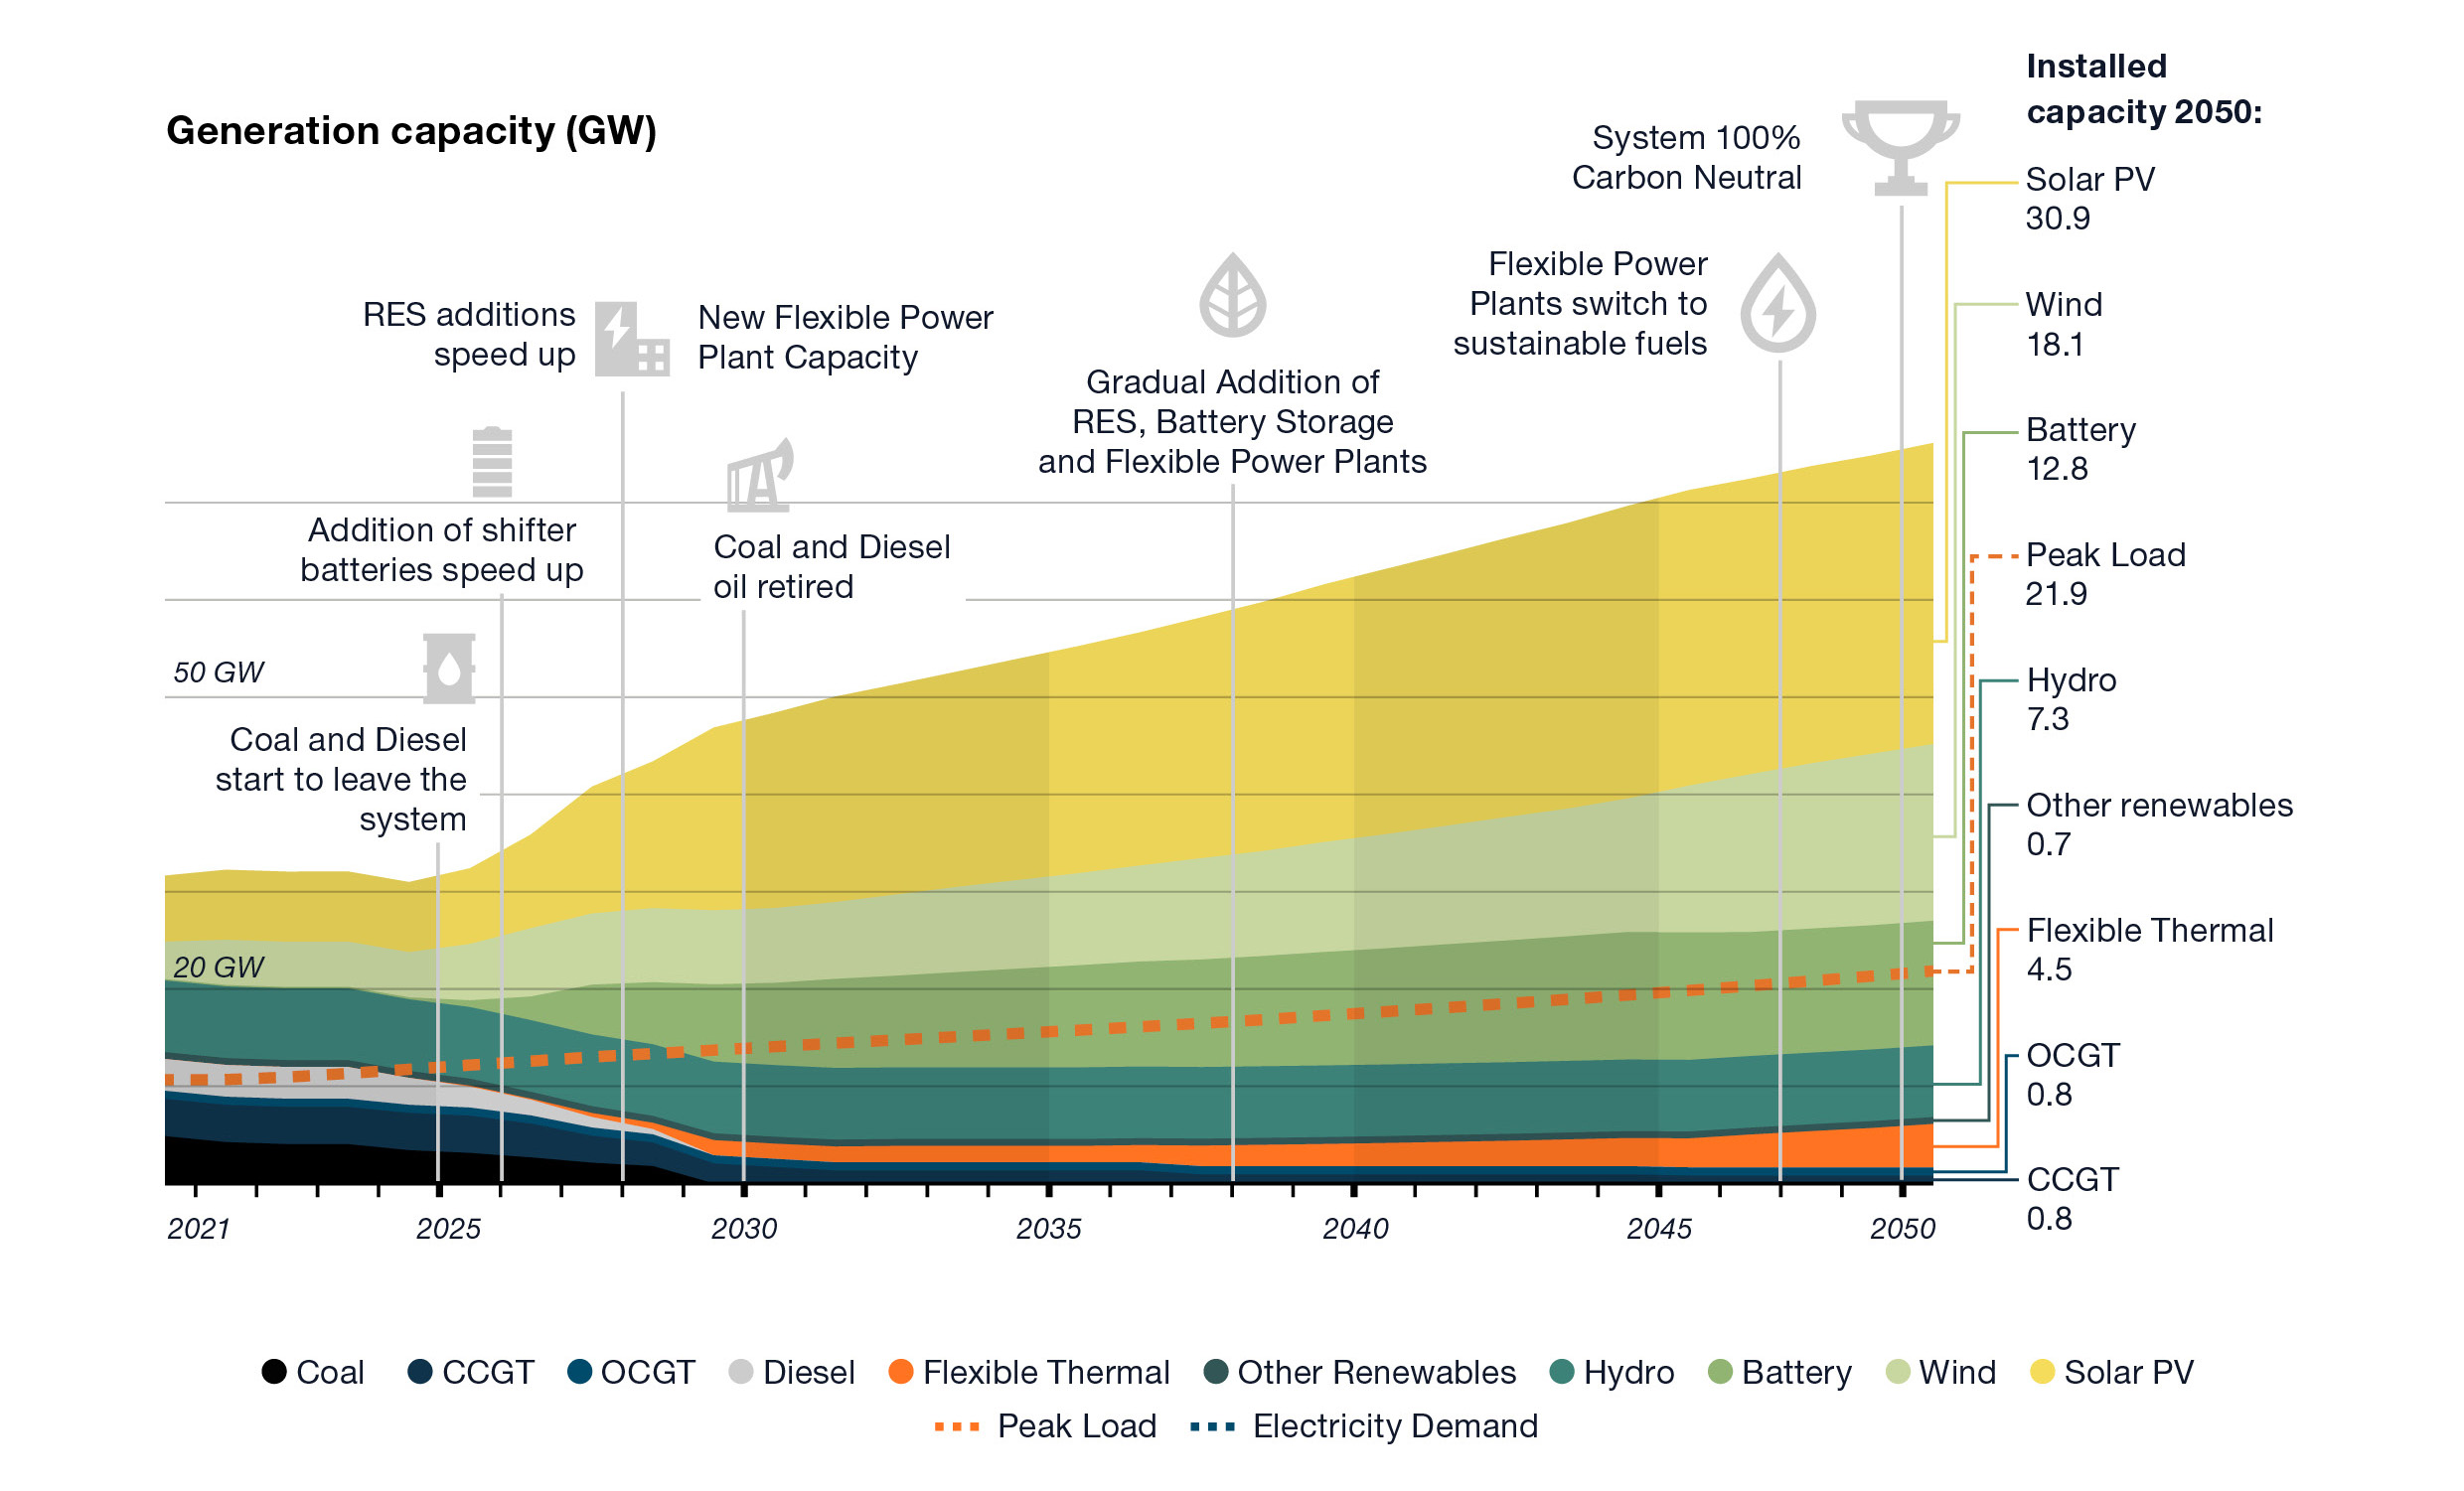 Chilean power system path to 100-expansion 2021-2050